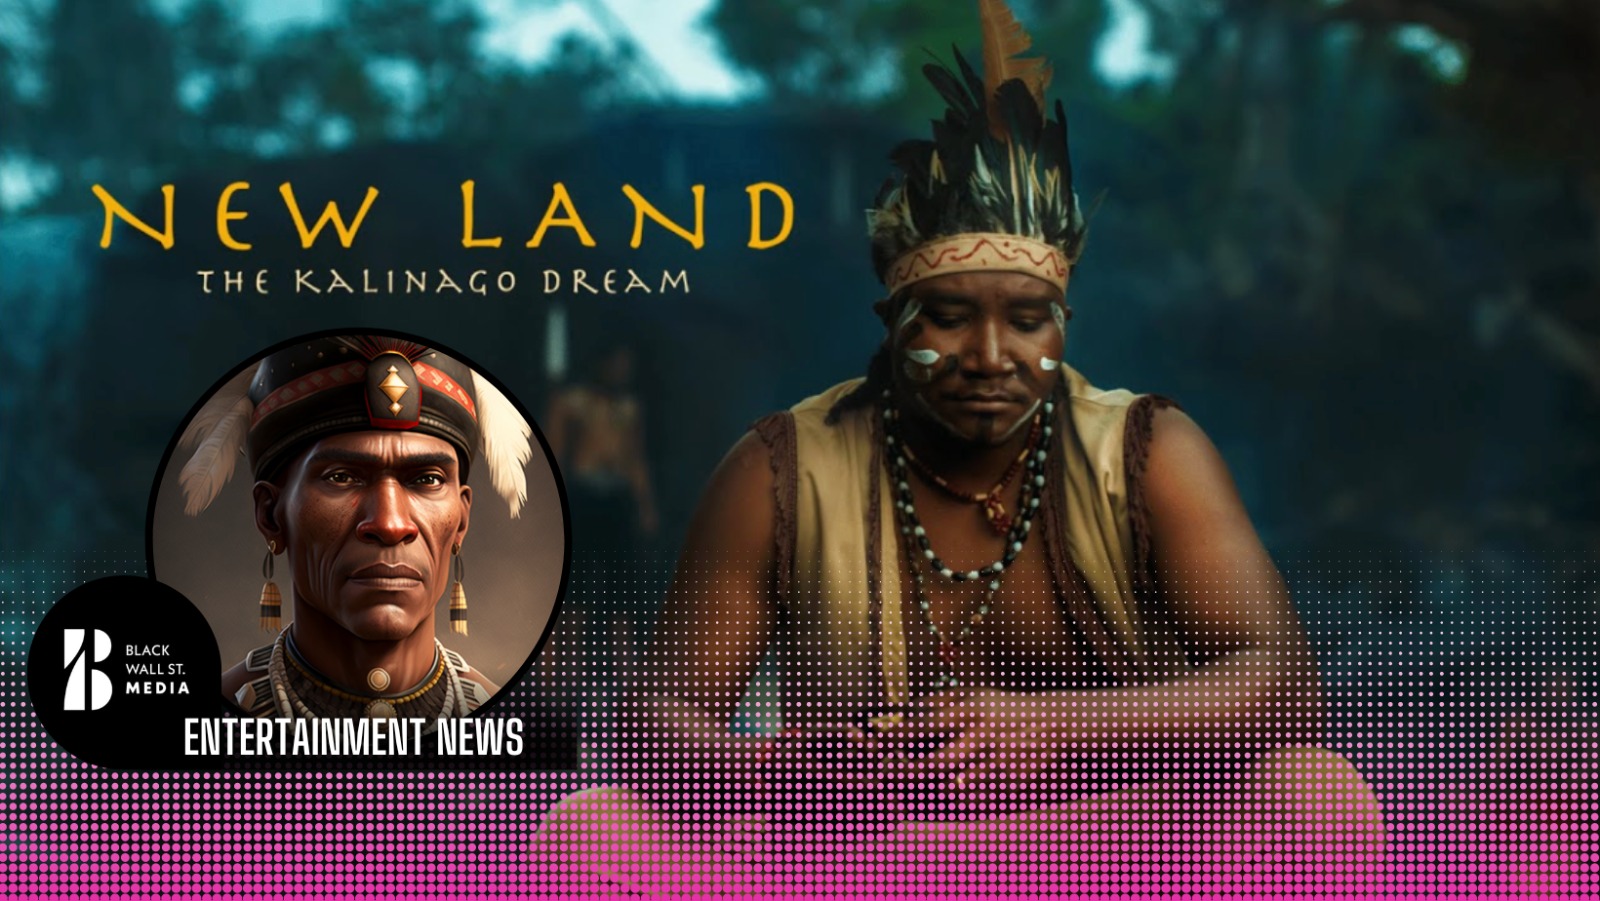 “New Land: The Kalinago Dream Documentary Wins Awards and Recognition Worldwide”